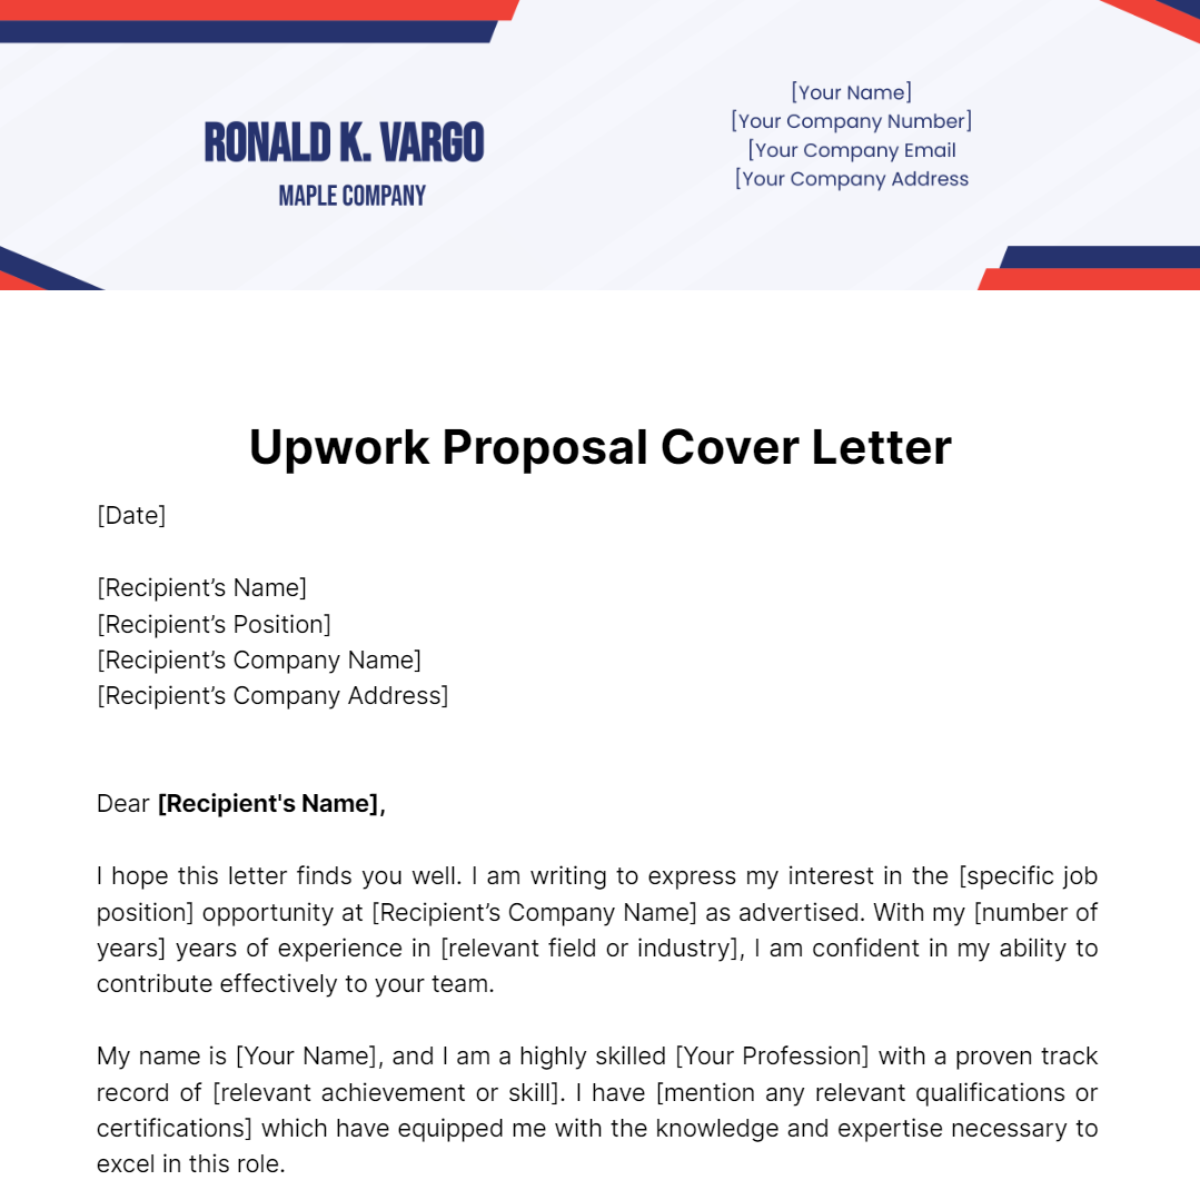 Upwork Proposal Cover Letter Template